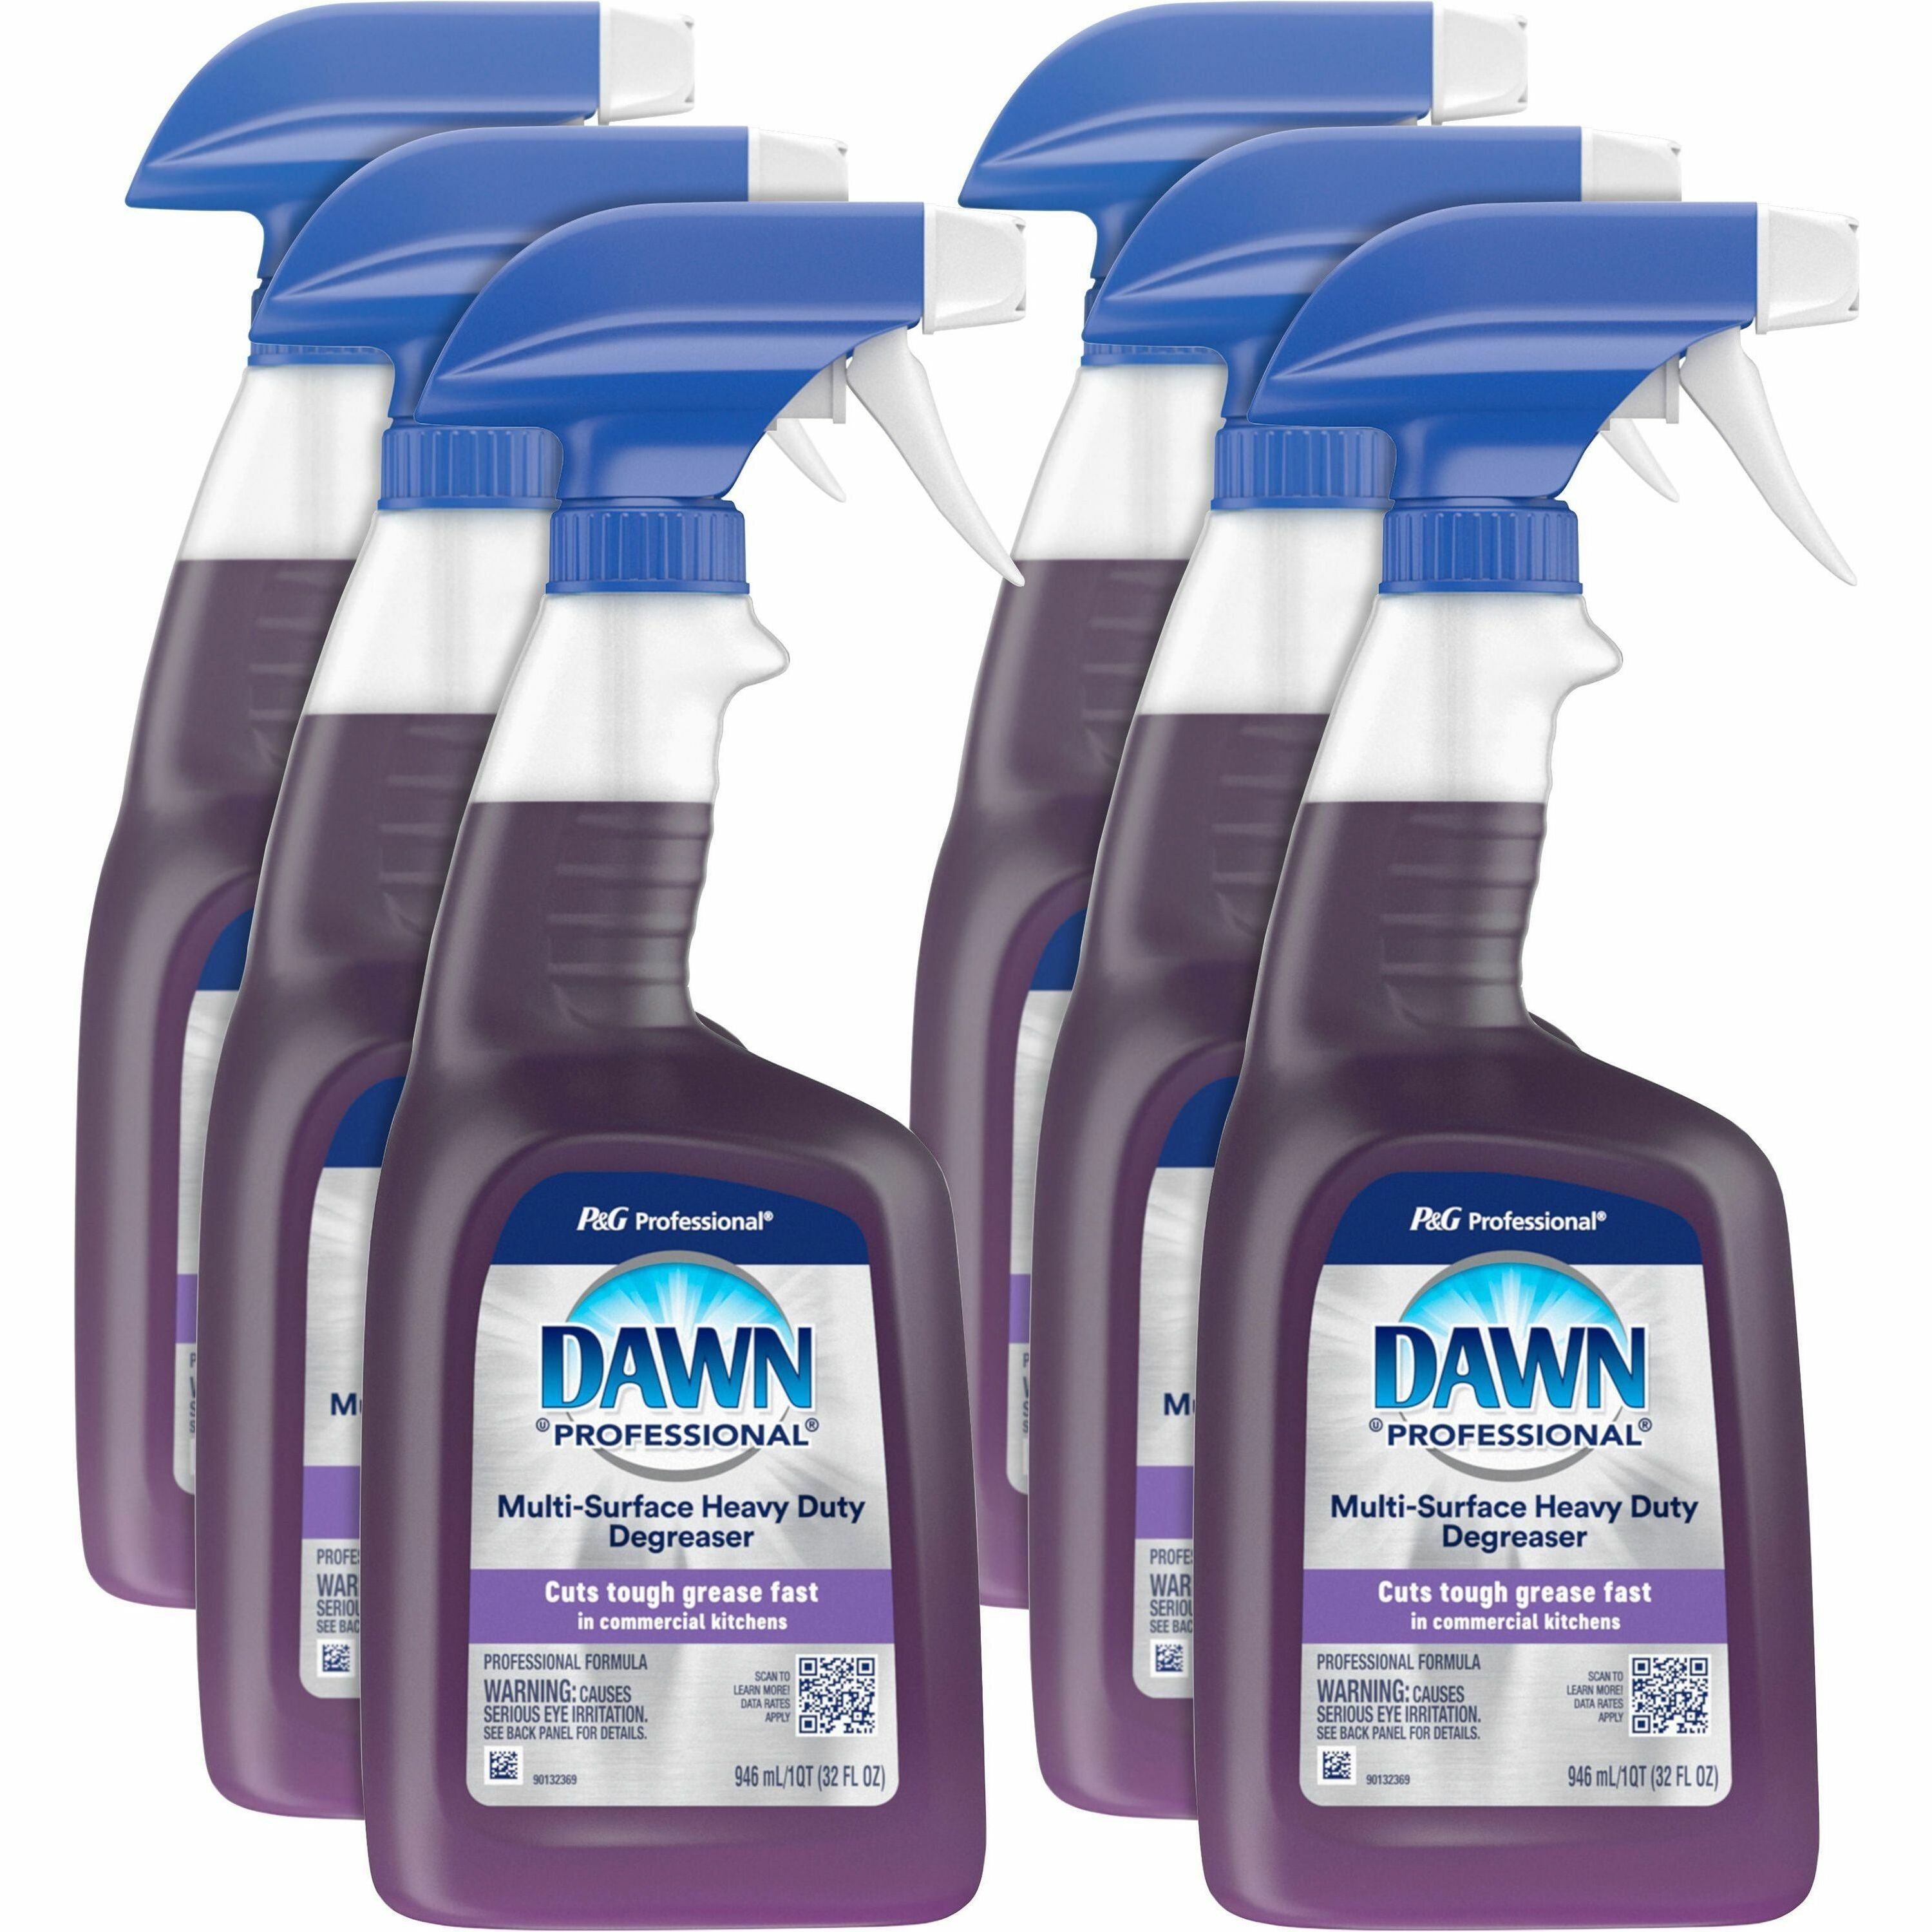 dawn-pro-heavy-duty-degreaser-ready-to-use-32-fl-oz-1-quart-6-carton-heavy-duty-non-flammable-caustic-free-phosphate-free-purple_pgc07308ct - 1